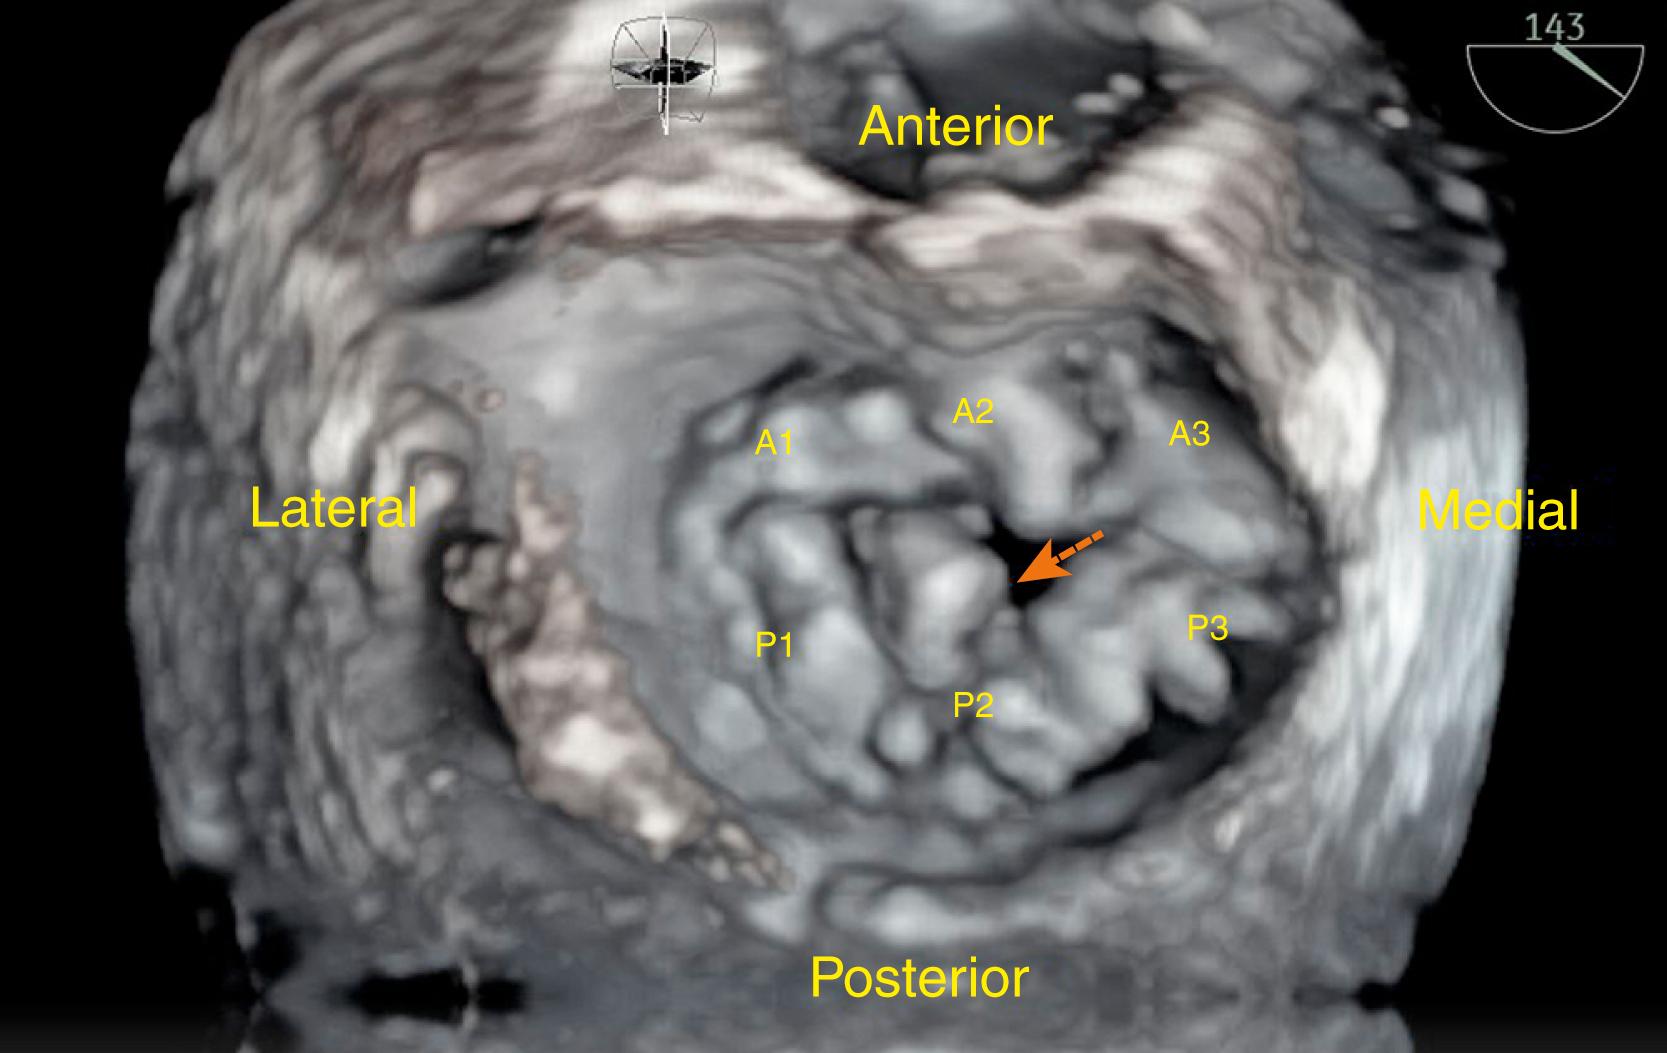 Figure 166.2, Three-dimensional transesophageal echocardiography mitral valve en face (“surgeon’s view”) from the left atrium, with appropriate anatomic landmarks. This patient has severe prolapse and flail of the P2 scallop (arrow) . (See accompanying Video 166.2 .)